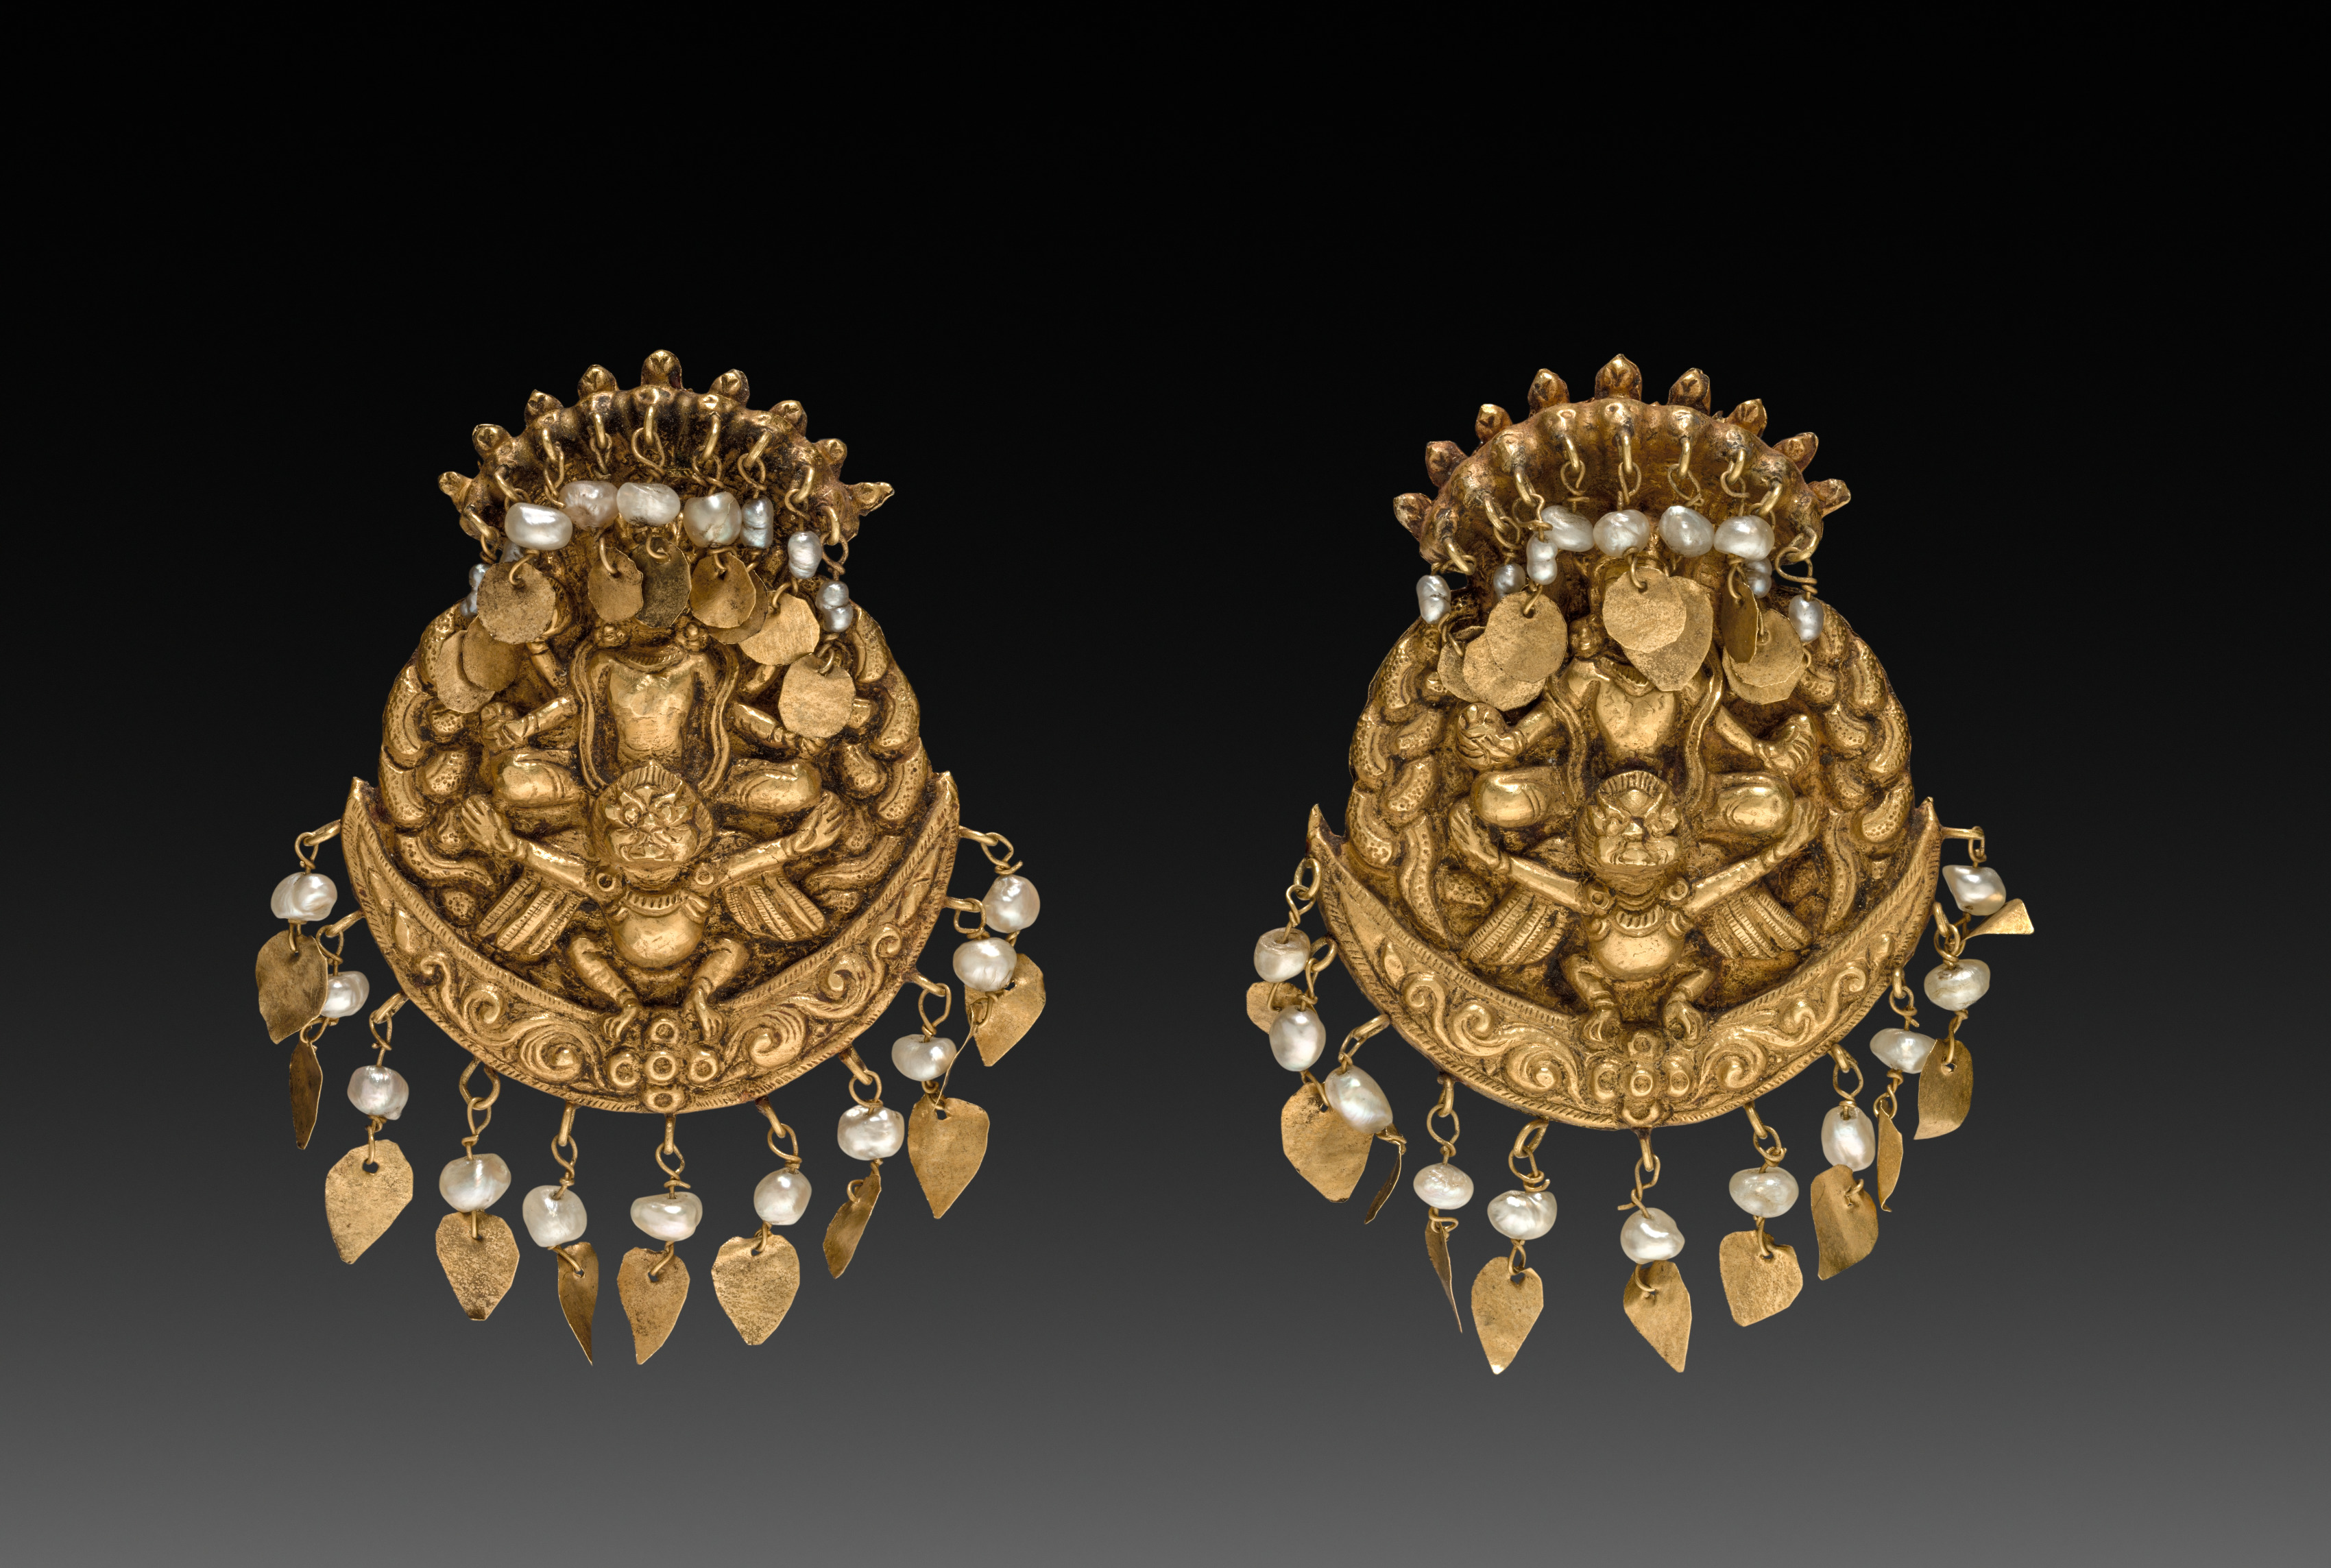 Pair of Earrings with Four-Armed Vishnu Riding Garuda with Nagas (serpent divinities)